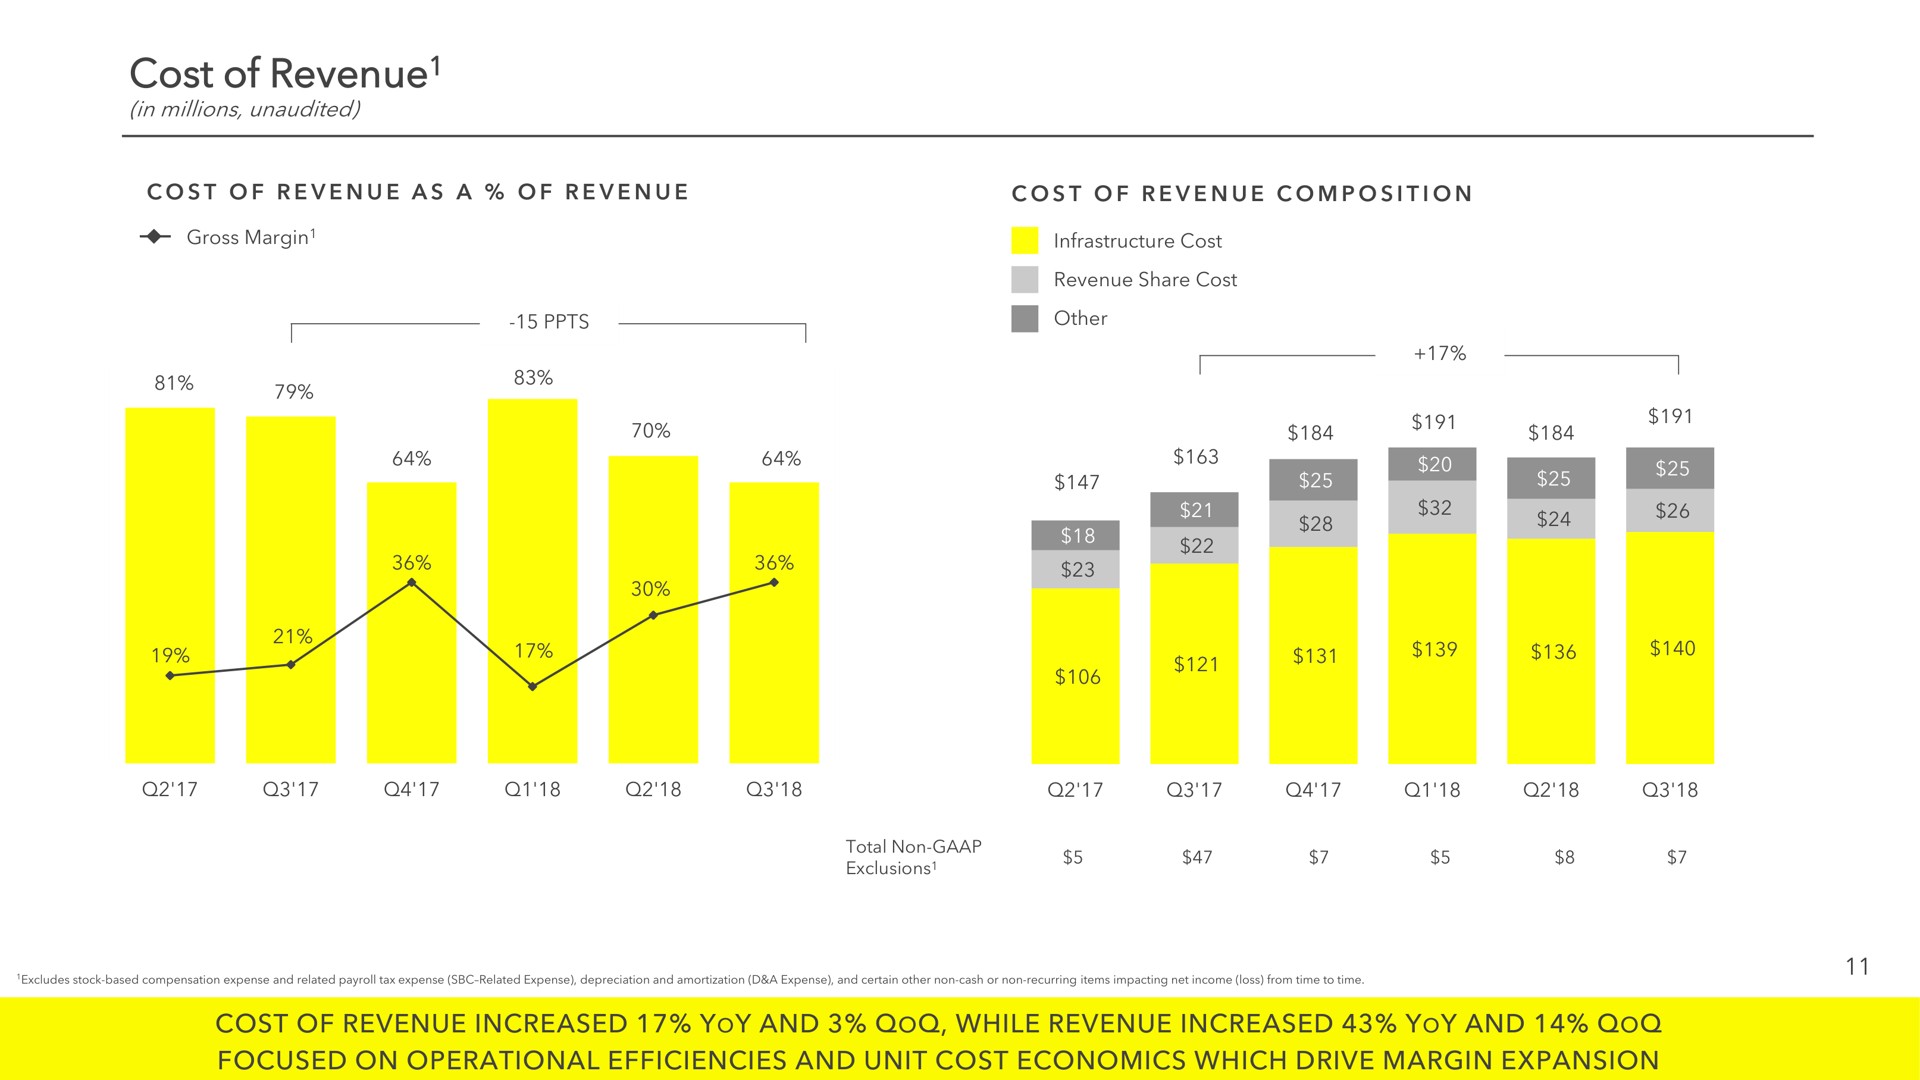 cost of revenue cost of revenue increased yoy and while revenue increased yoy and focused on operational efficiencies and unit cost economics which drive margin expansion other ras saa total non | Snap Inc